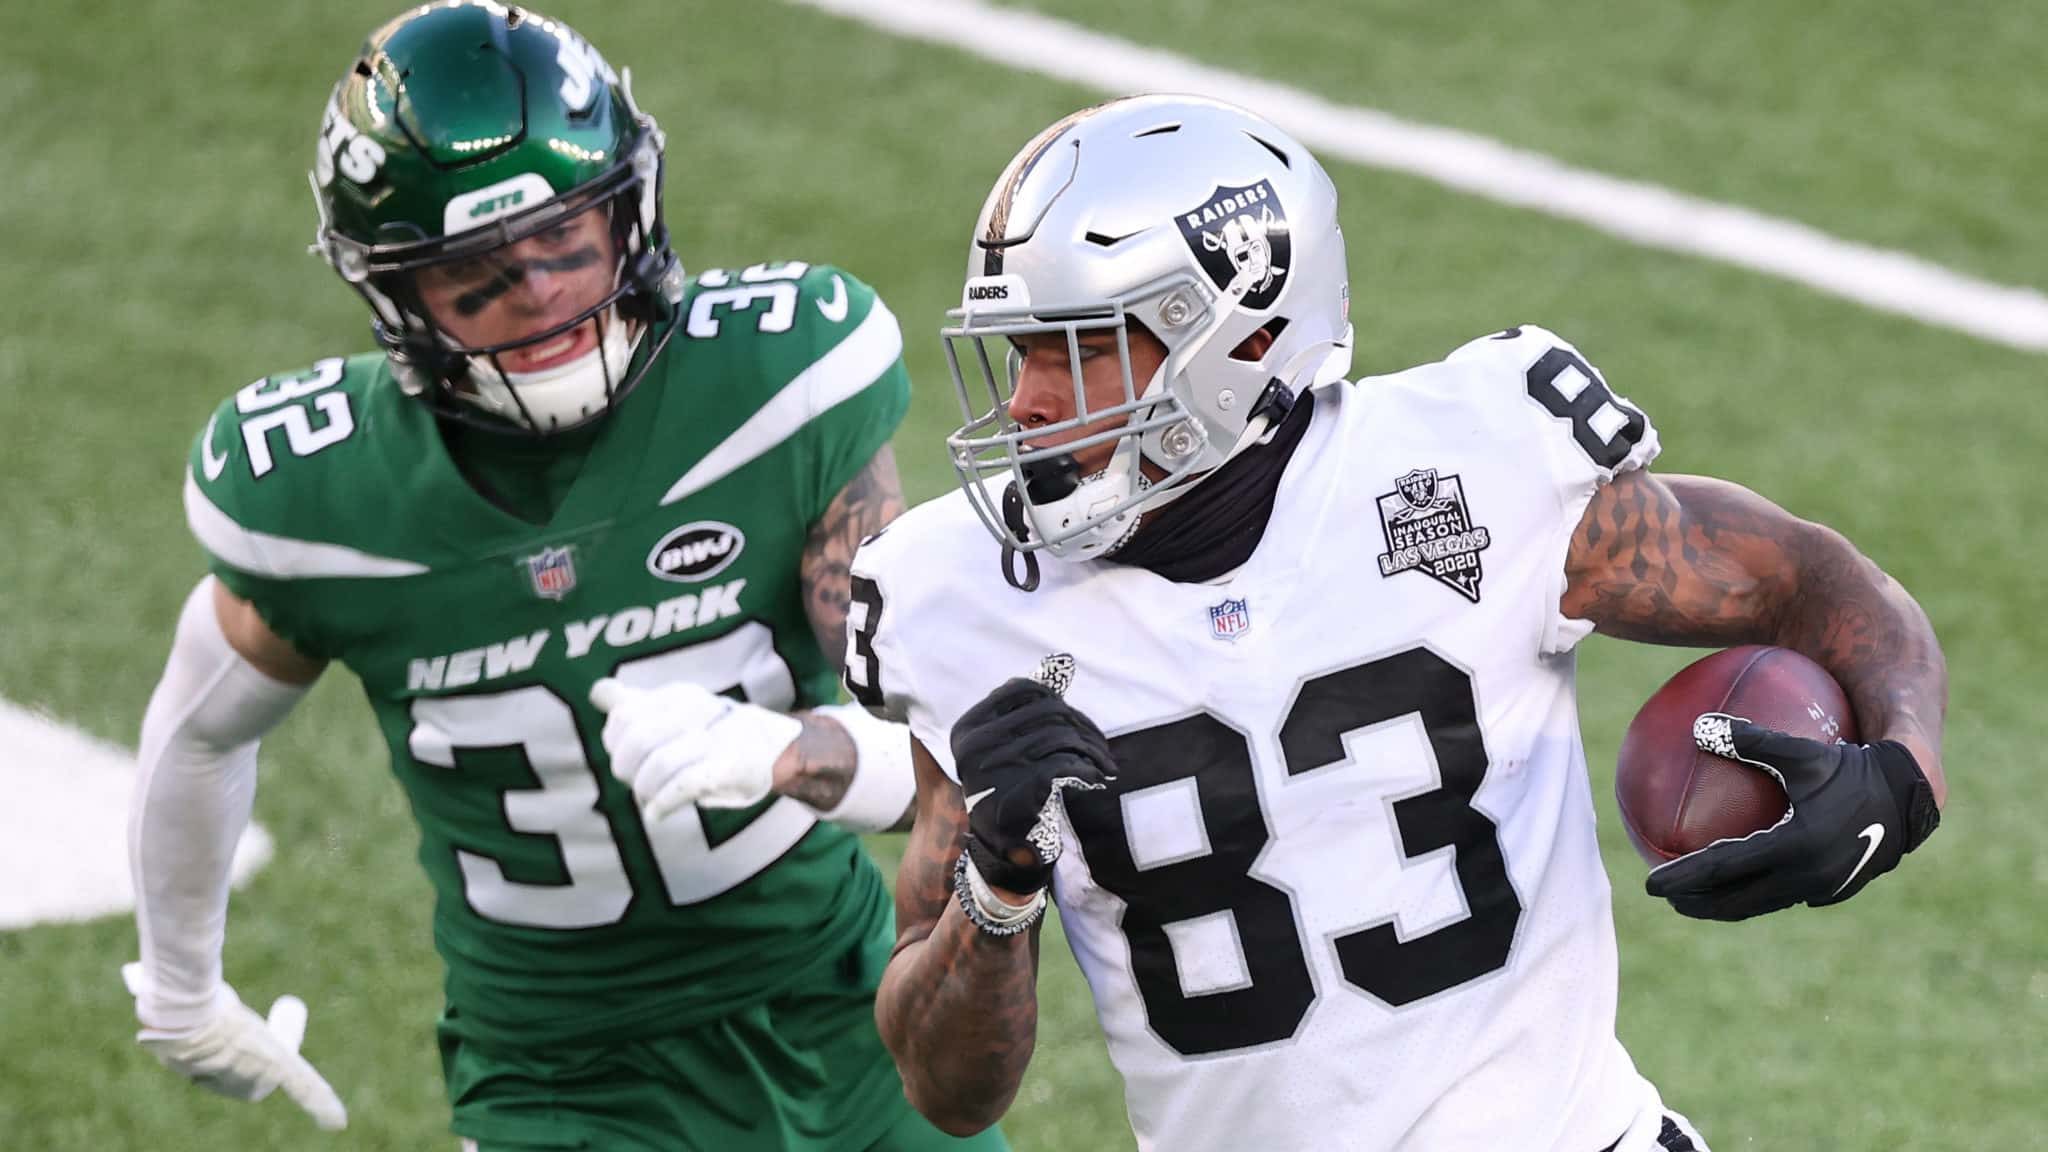 EAST RUTHERFORD, NEW JERSEY - DECEMBER 06: Darren Waller #83 of the Las Vegas Raiders carries the ball as Ashtyn Davis #32 of the New York Jets gives chase during the second half at MetLife Stadium on December 06, 2020 in East Rutherford, New Jersey.